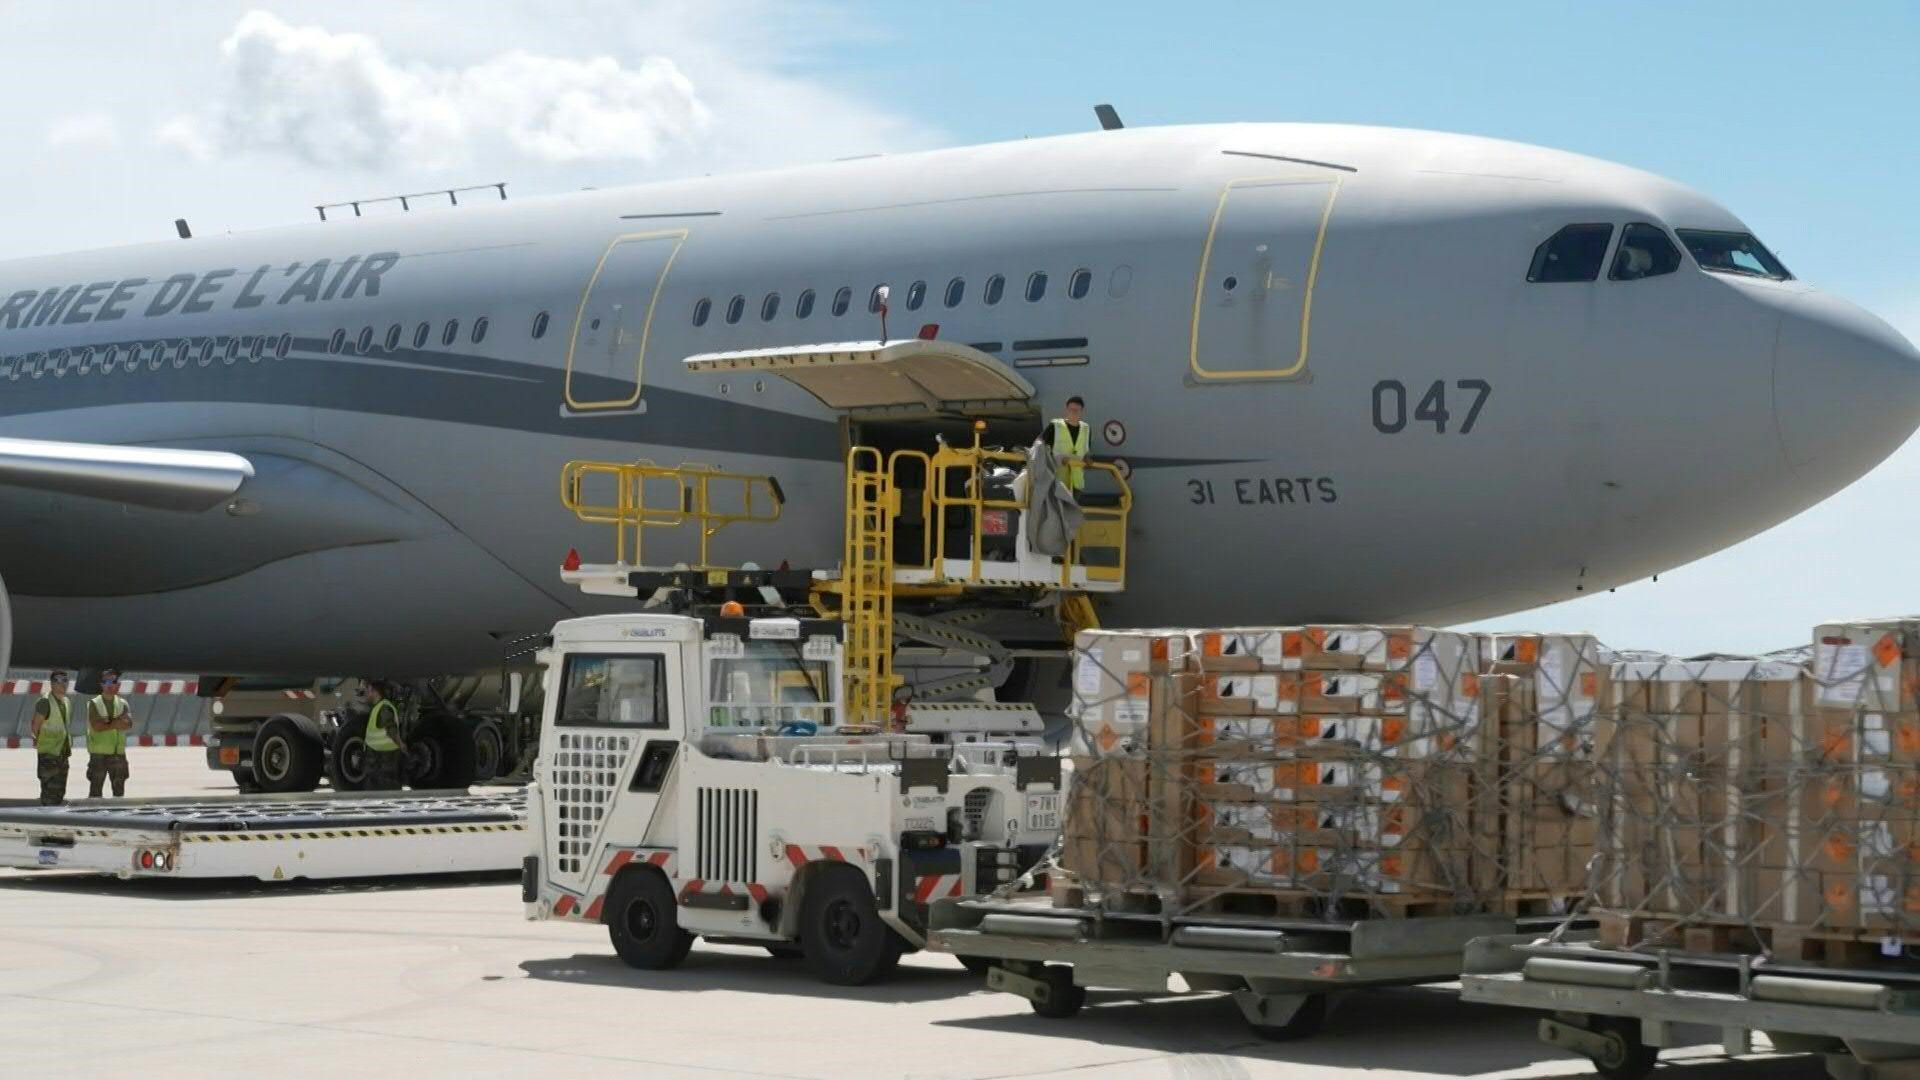 Loading of a French air force plane to New Caledonia